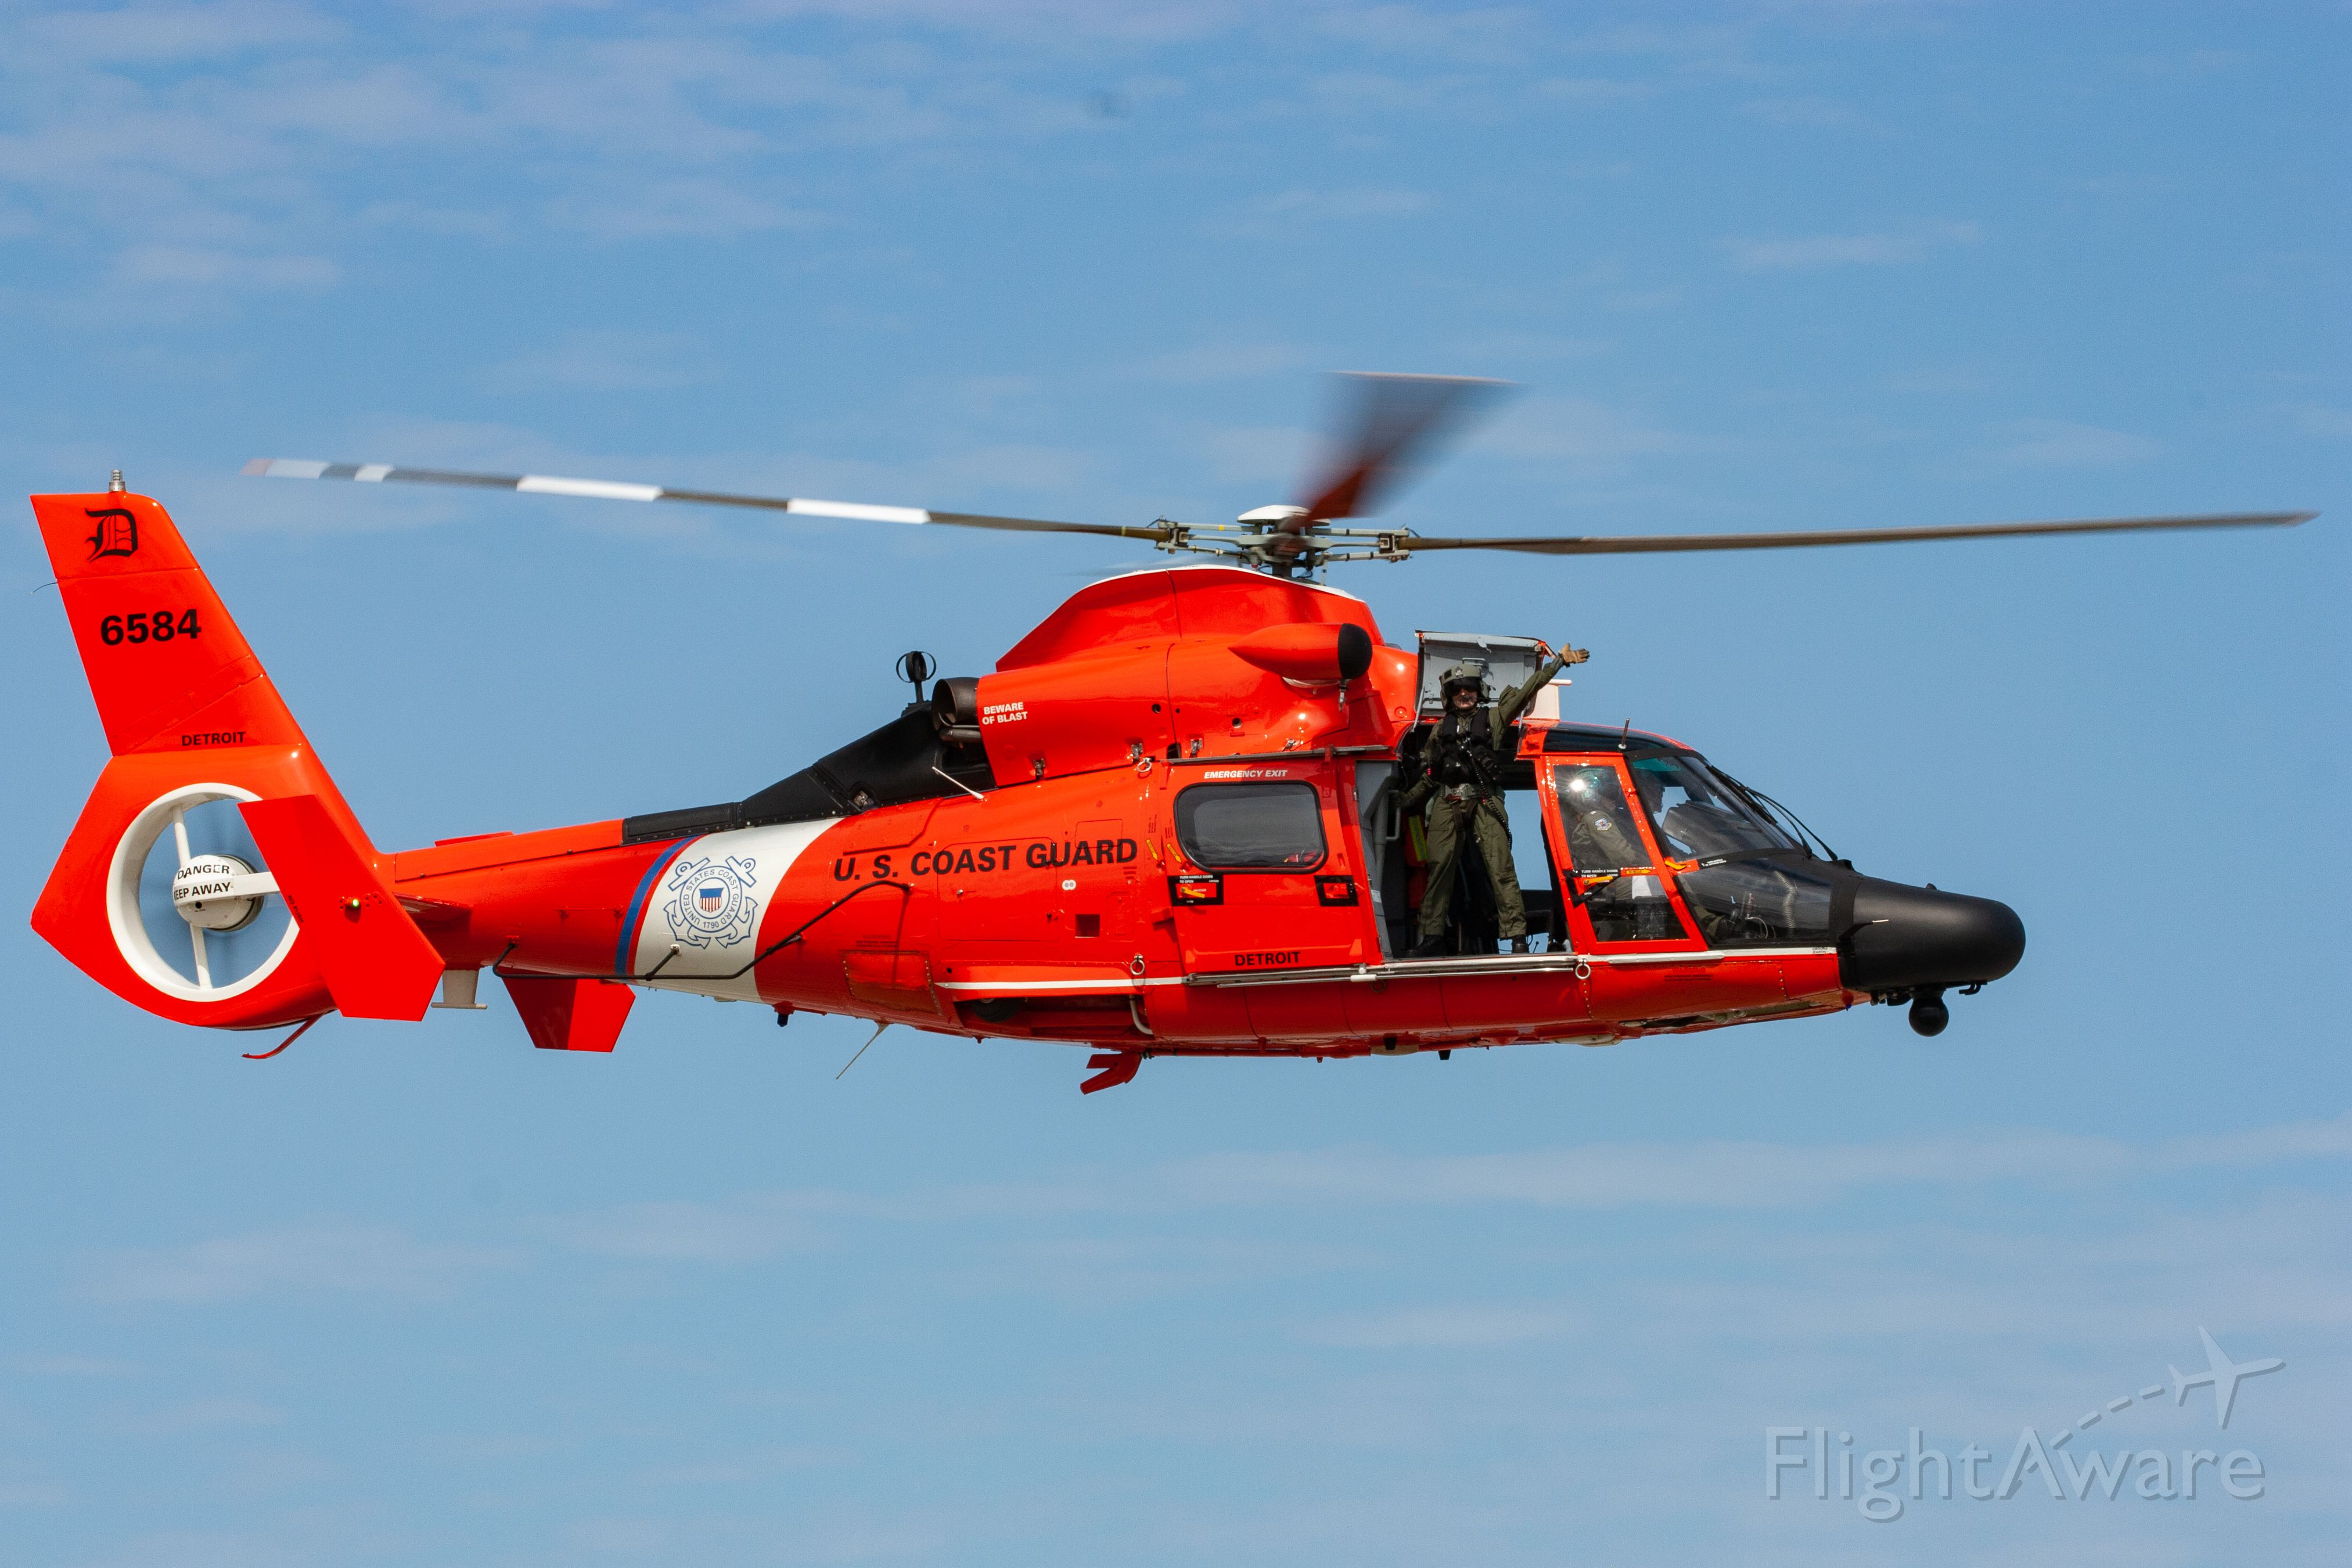 VOUGHT SA-366 Panther 800 (6584) - USCG MH-65C 6584 performing a SAR demo at the 2019 Cleveland National Air Show